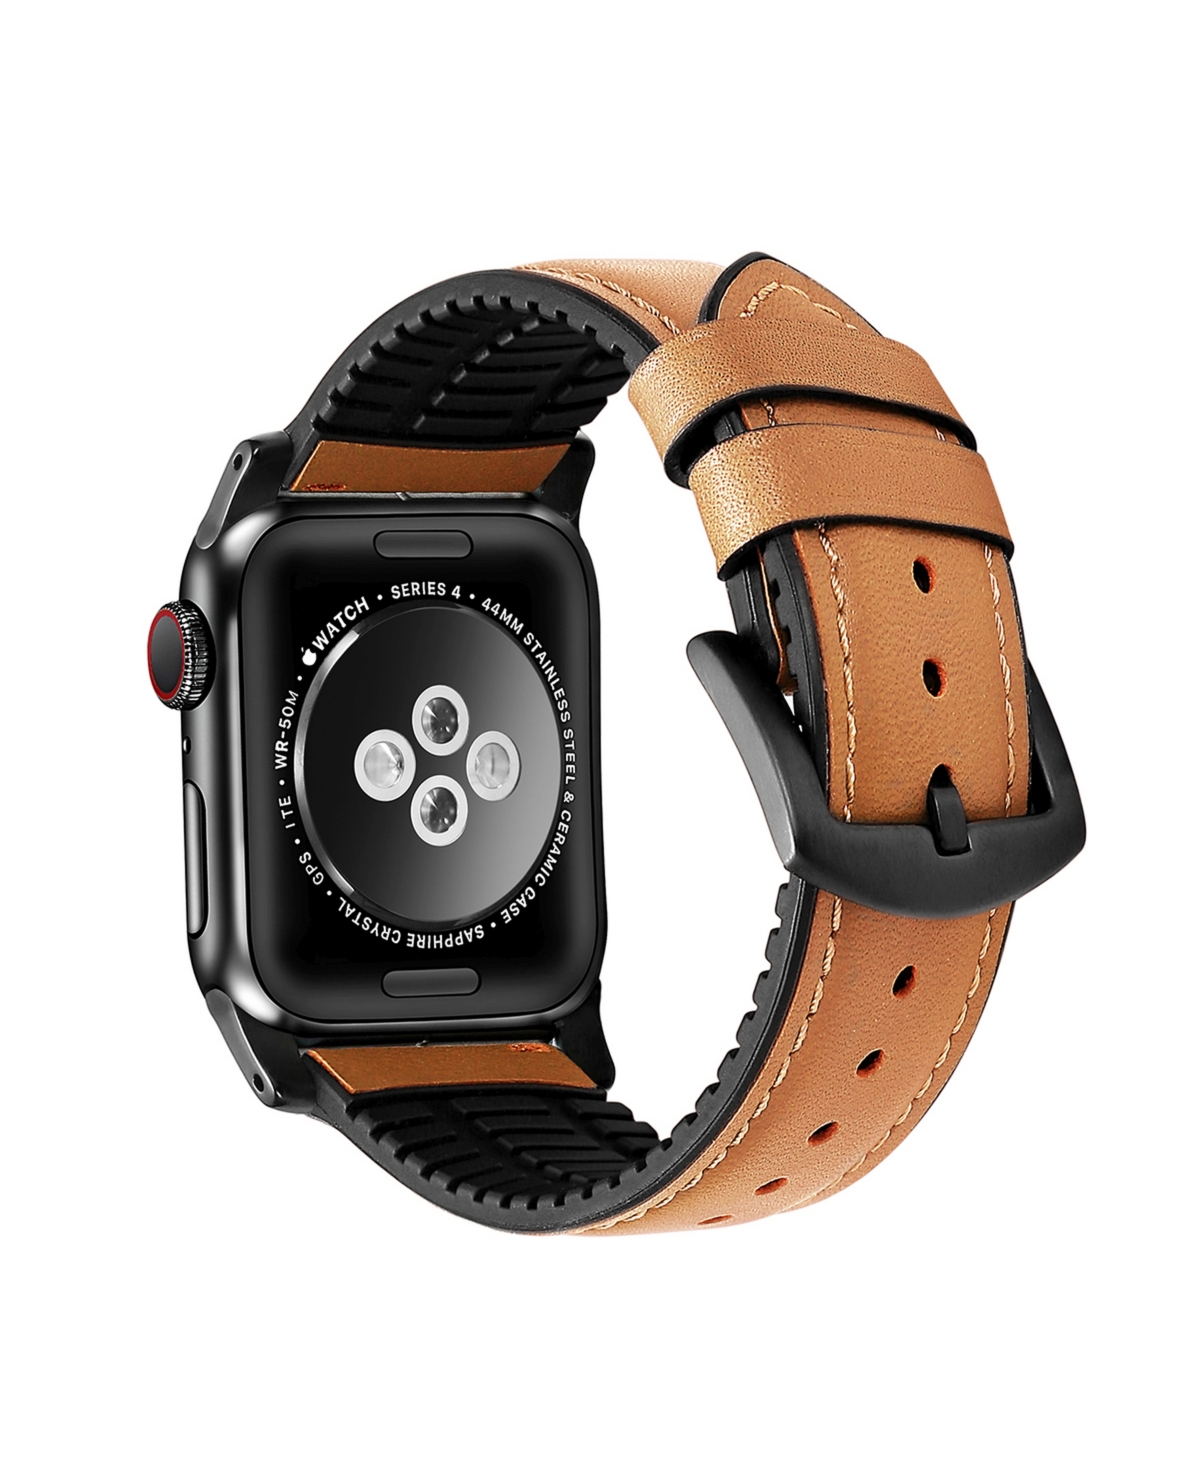 Men's and Women's Genuine Leather Band for Apple Watch 38mm - Multi